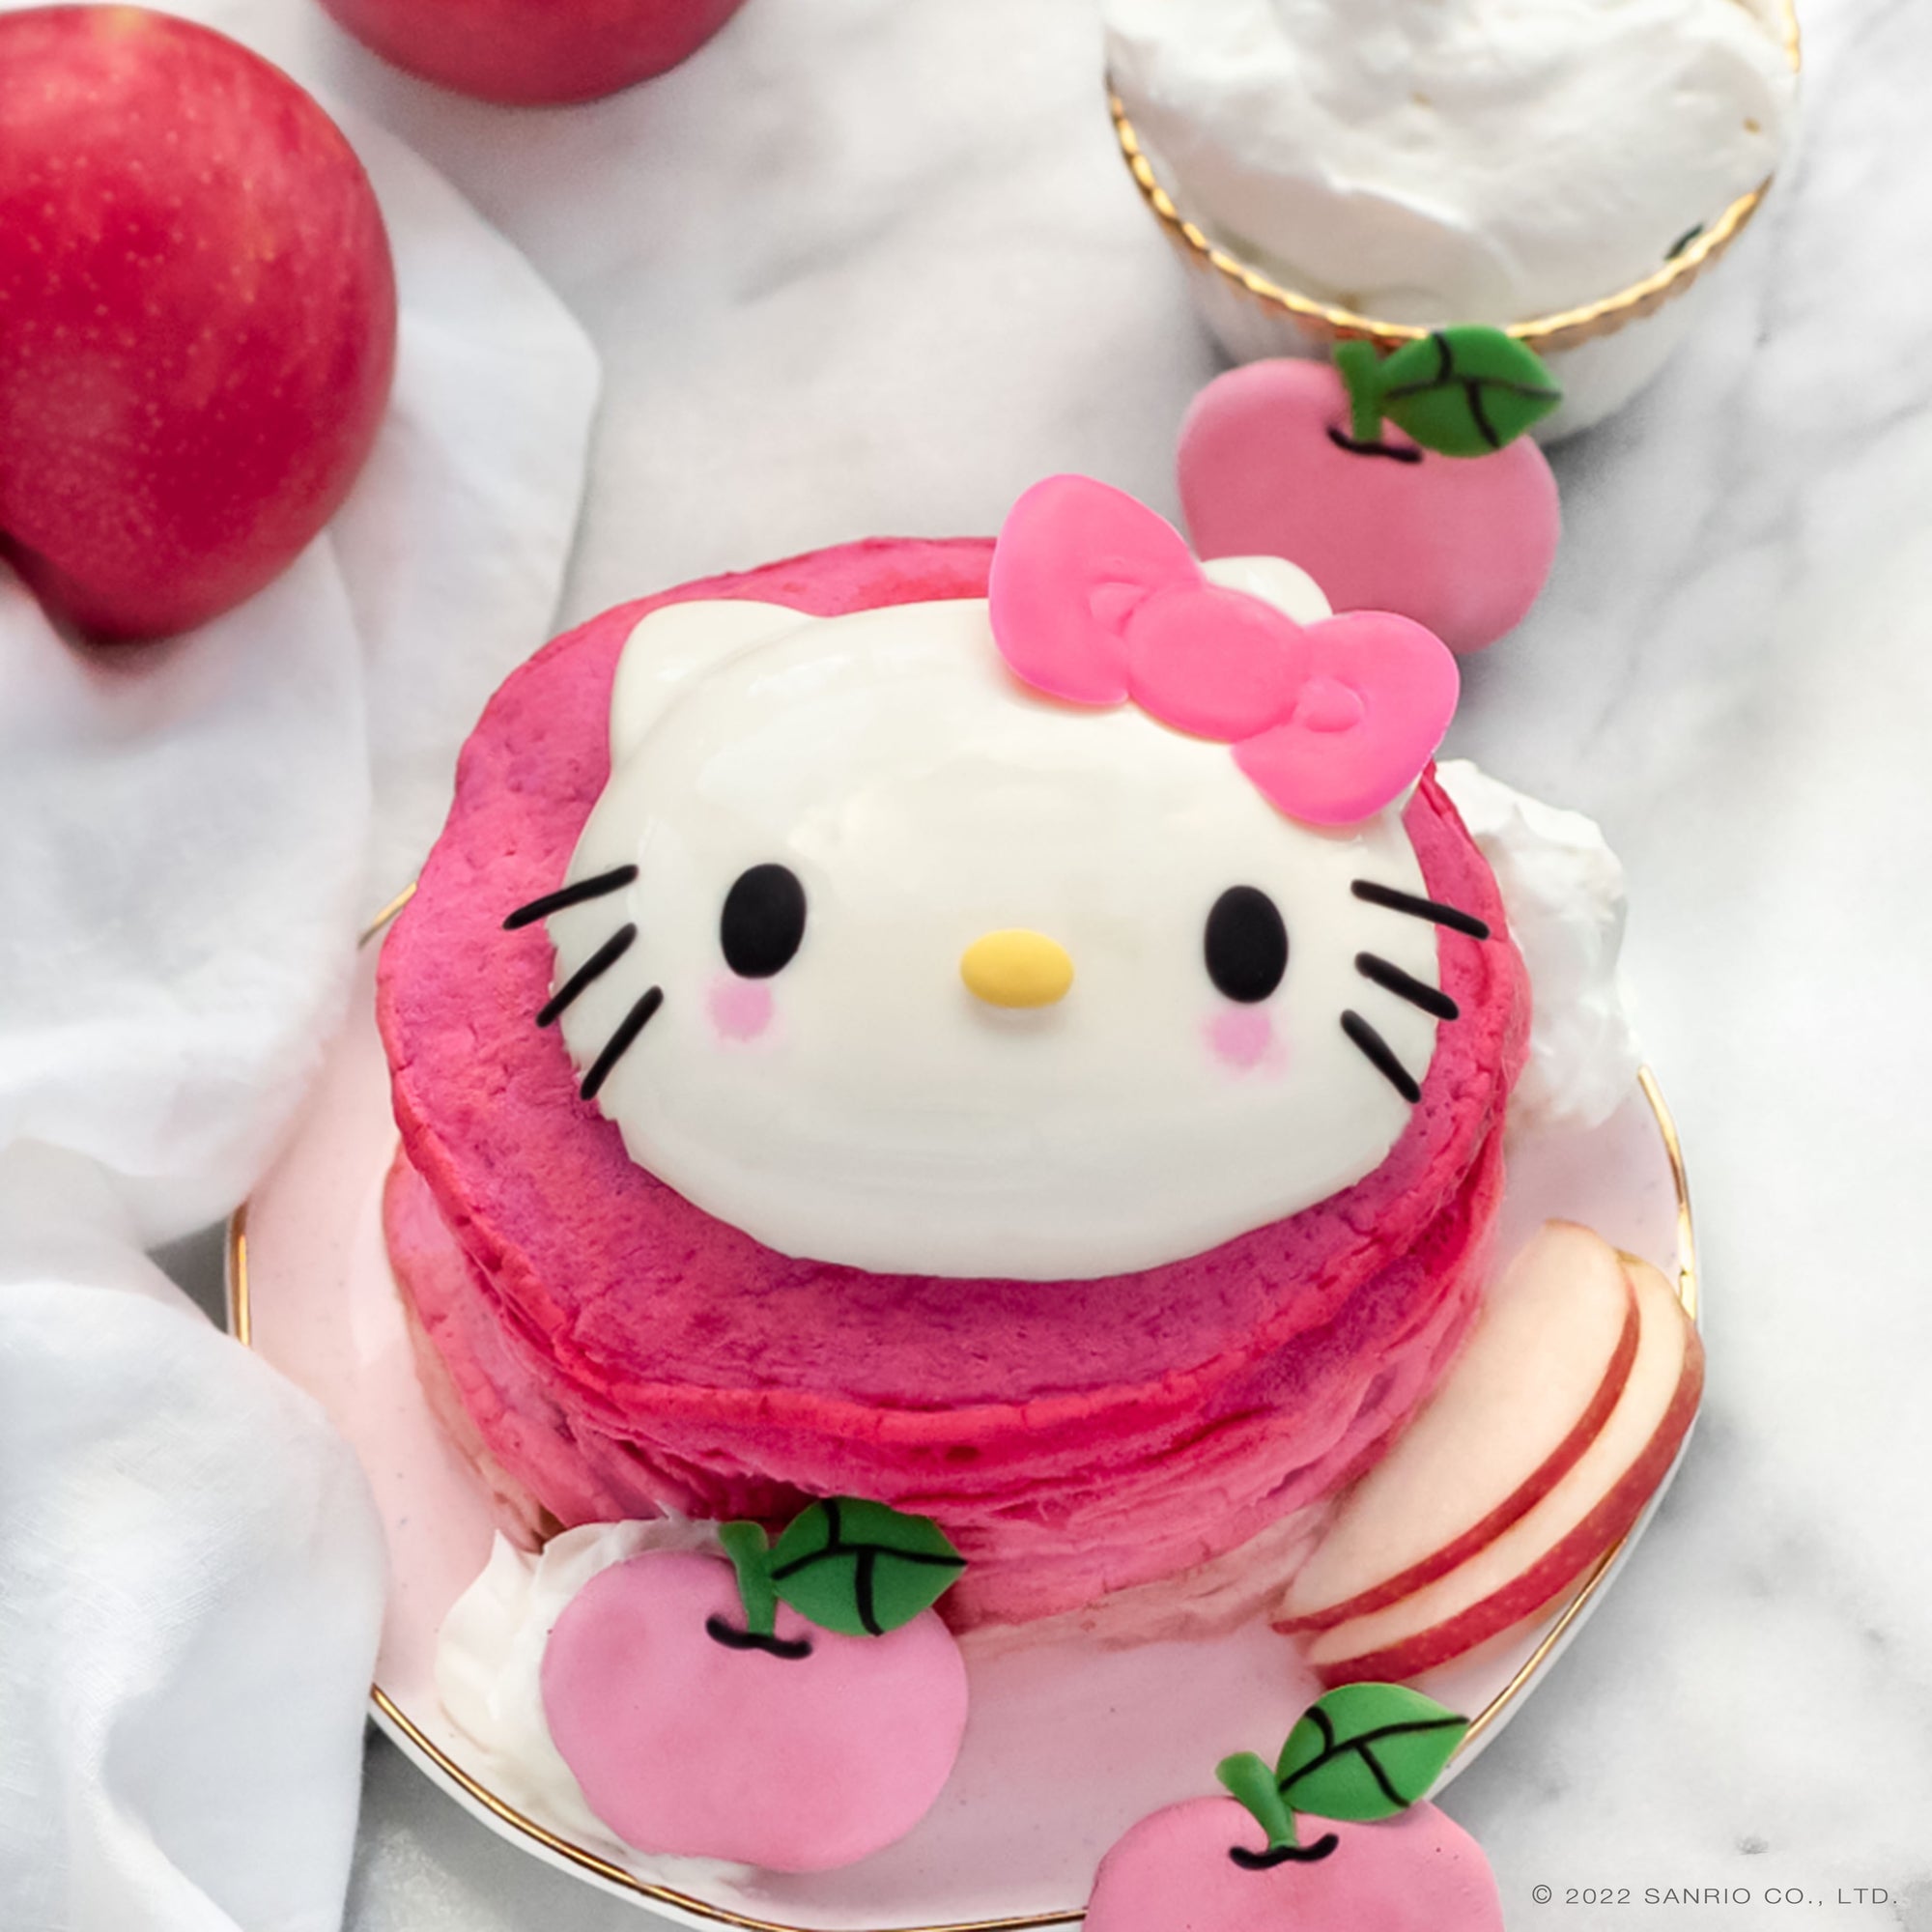 Happy National Pancake Day from Hello Kitty